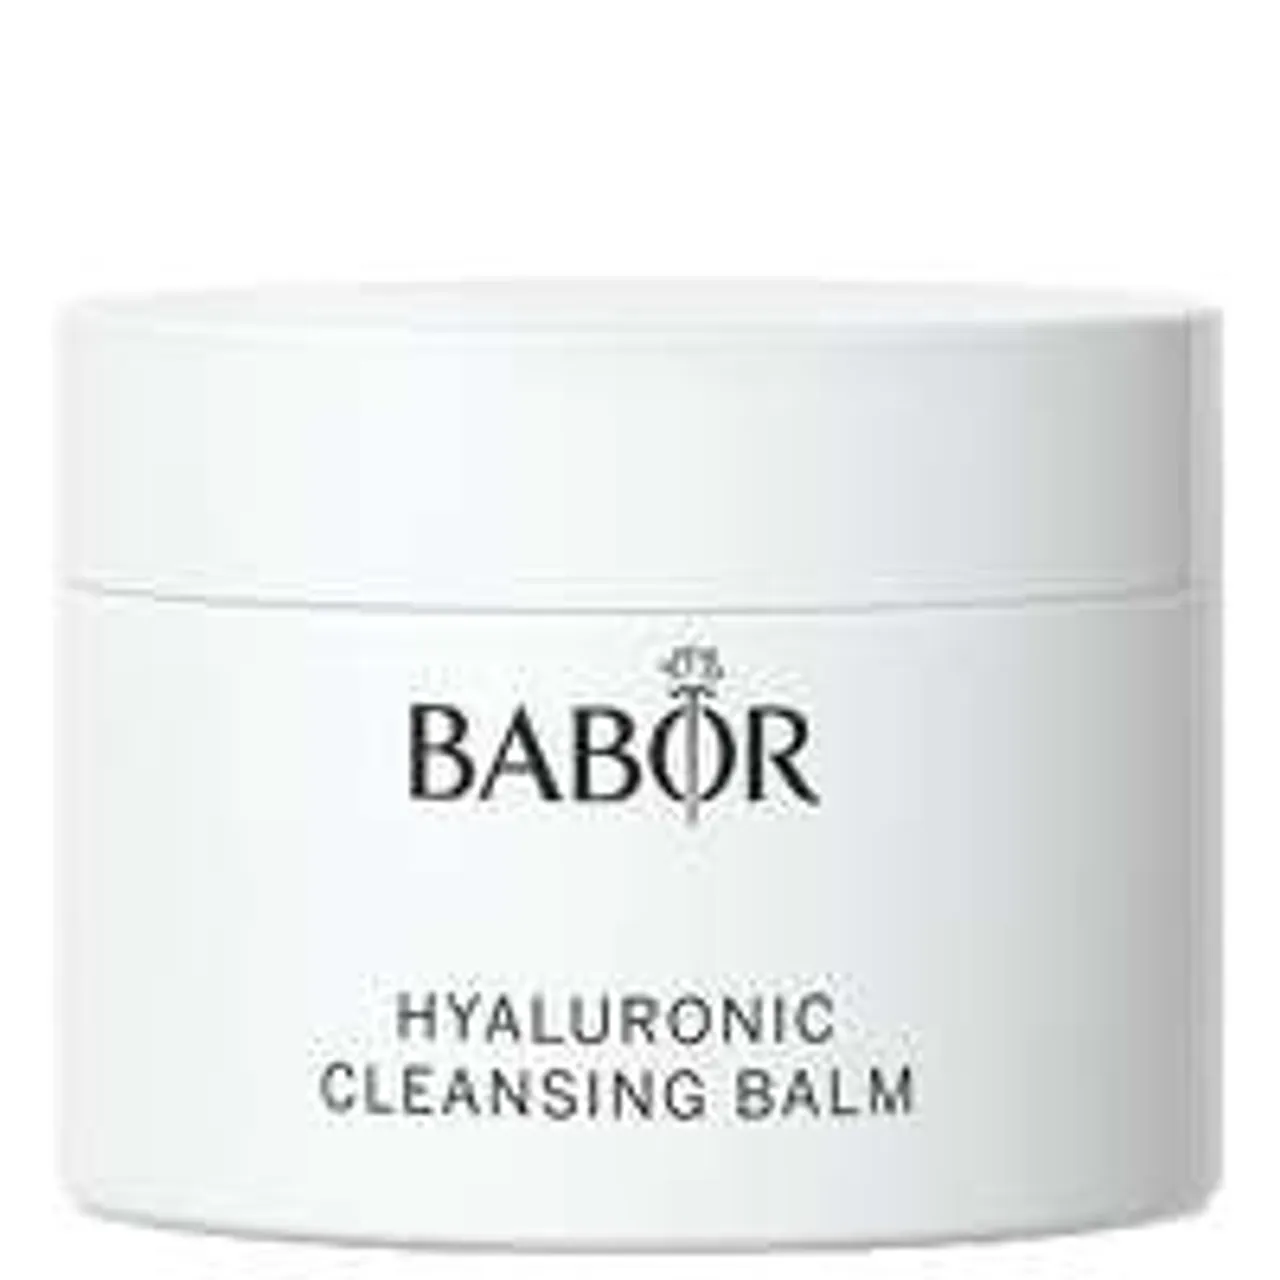 BABOR Cleansing Hyaluronic Cleansing Balm 150ml